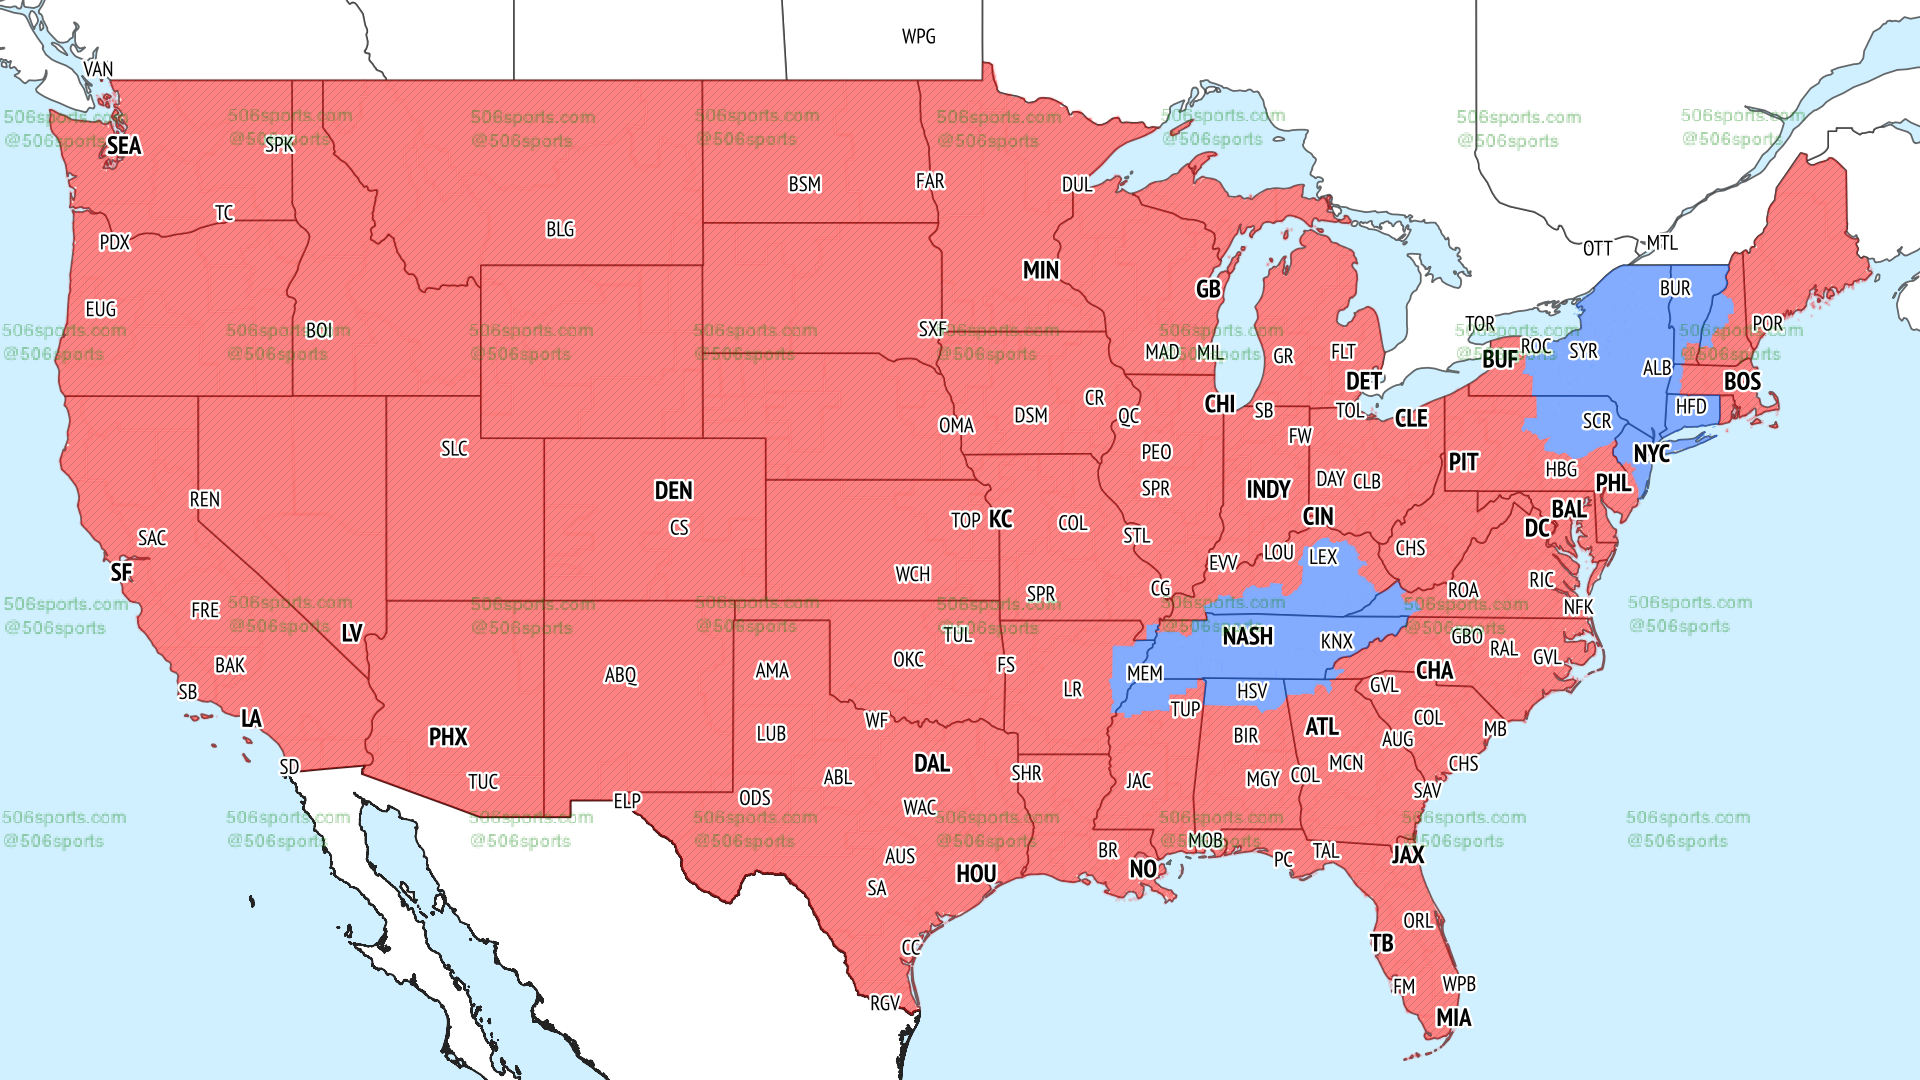 NFL coverage map of late FOX games in Week 1